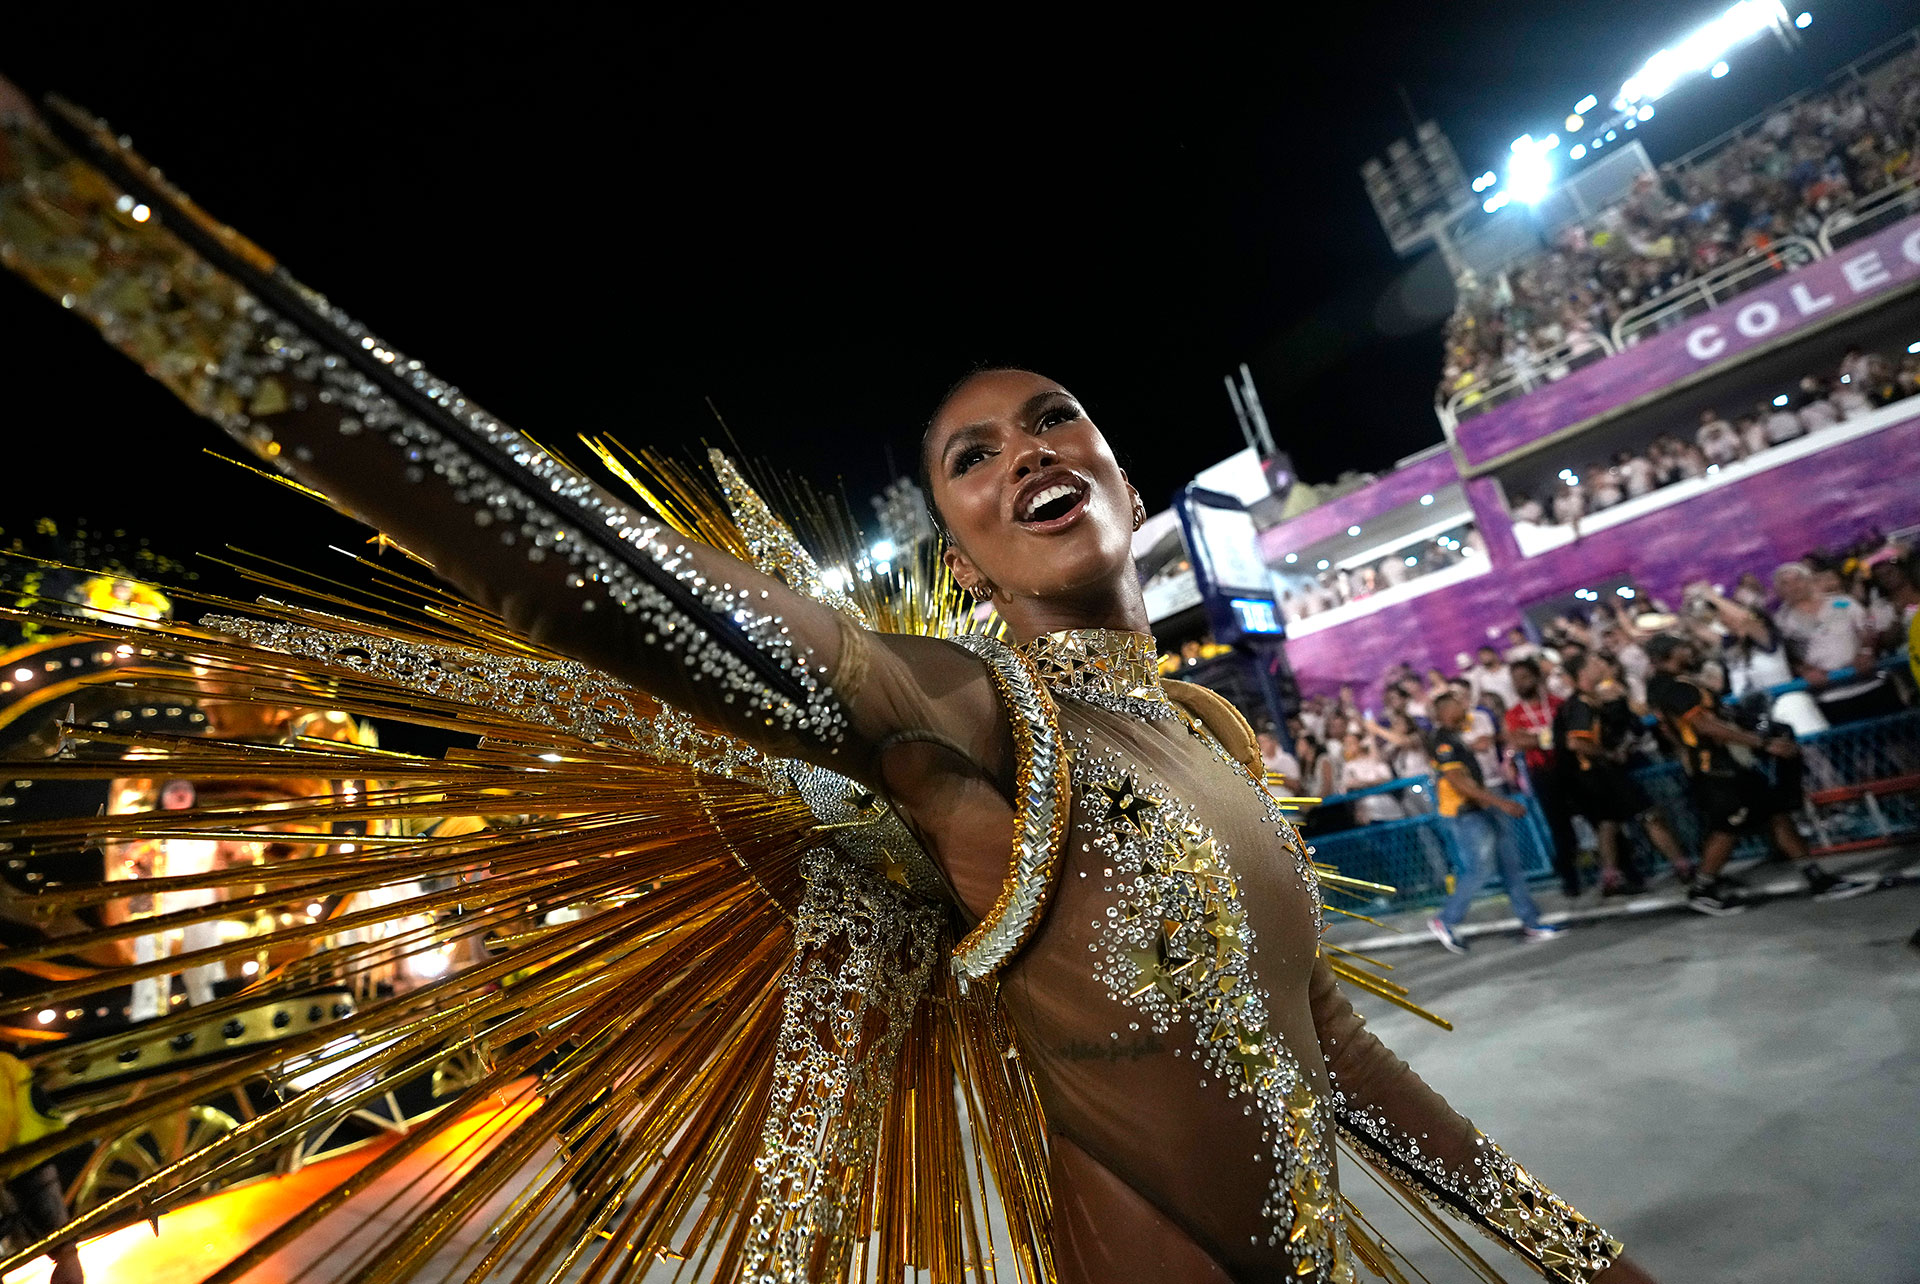 An artist from the Sao Clemente samba school parades during Carnival celebrations at the Sambadrome in Rio de Janeiro